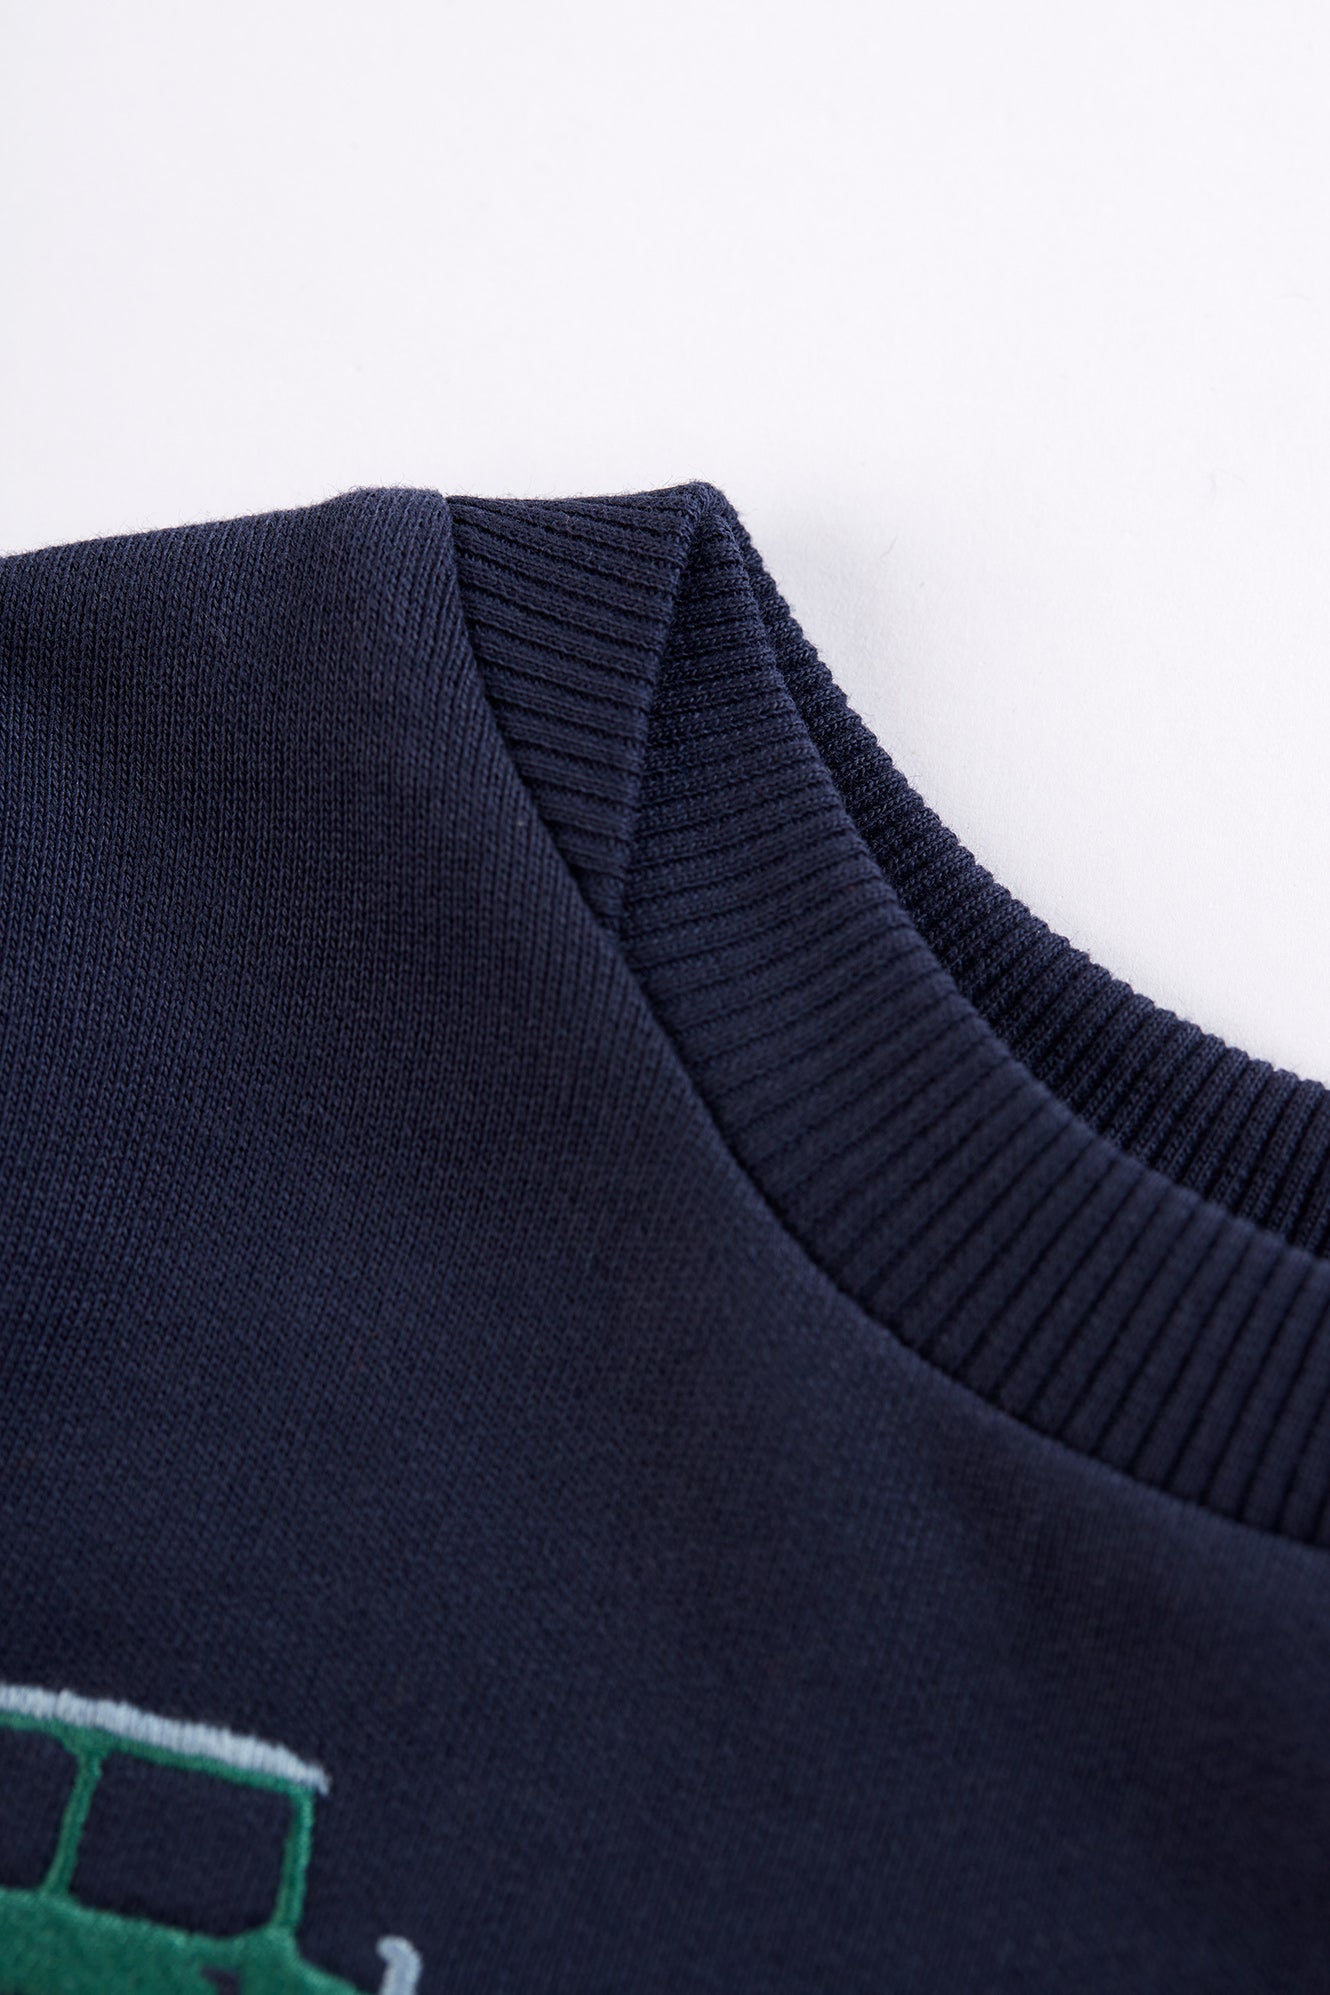 Indigo - Tractors | Switch Easy On Jumper | Long Sleeve Top | GOTS Organic Cotton